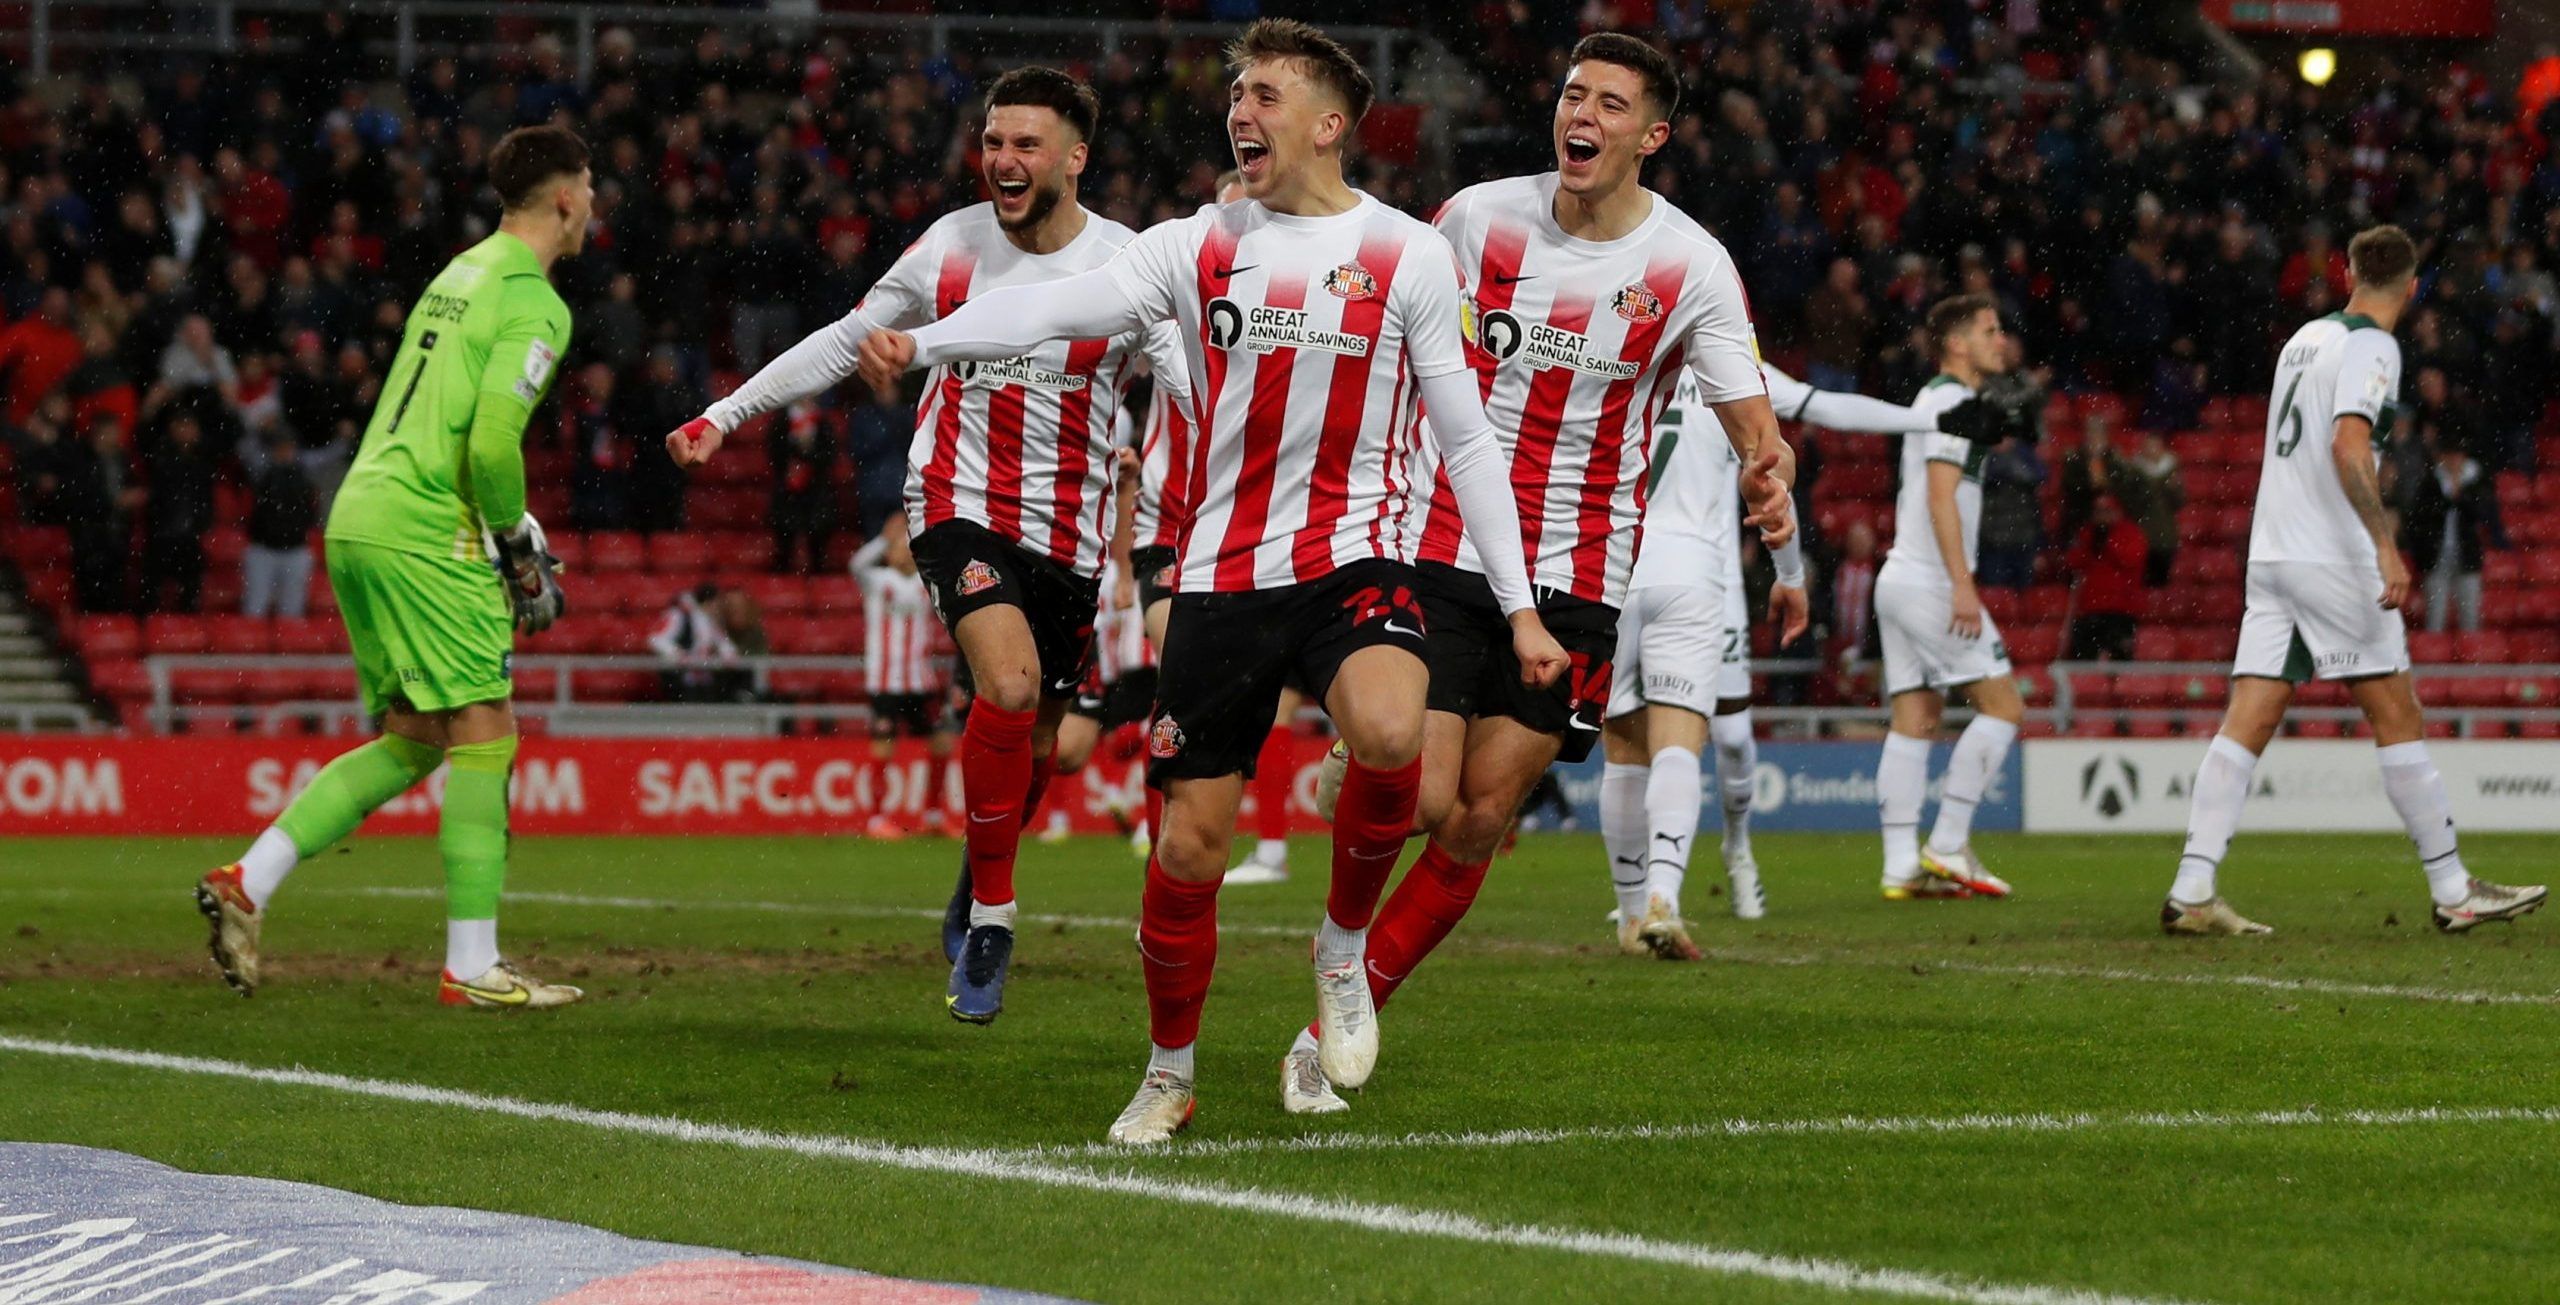 Soccer Football - League One- Sunderland v Plymouth Argyle - Stadium of Light, Sunderland, Britain - December 11, 2021  Sunderland’s Dan Neil celebrates scoring their first goal  Action Images/Lee Smith  EDITORIAL USE ONLY. No use with unauthorized audio, video, data, fixture lists, club/league logos or 